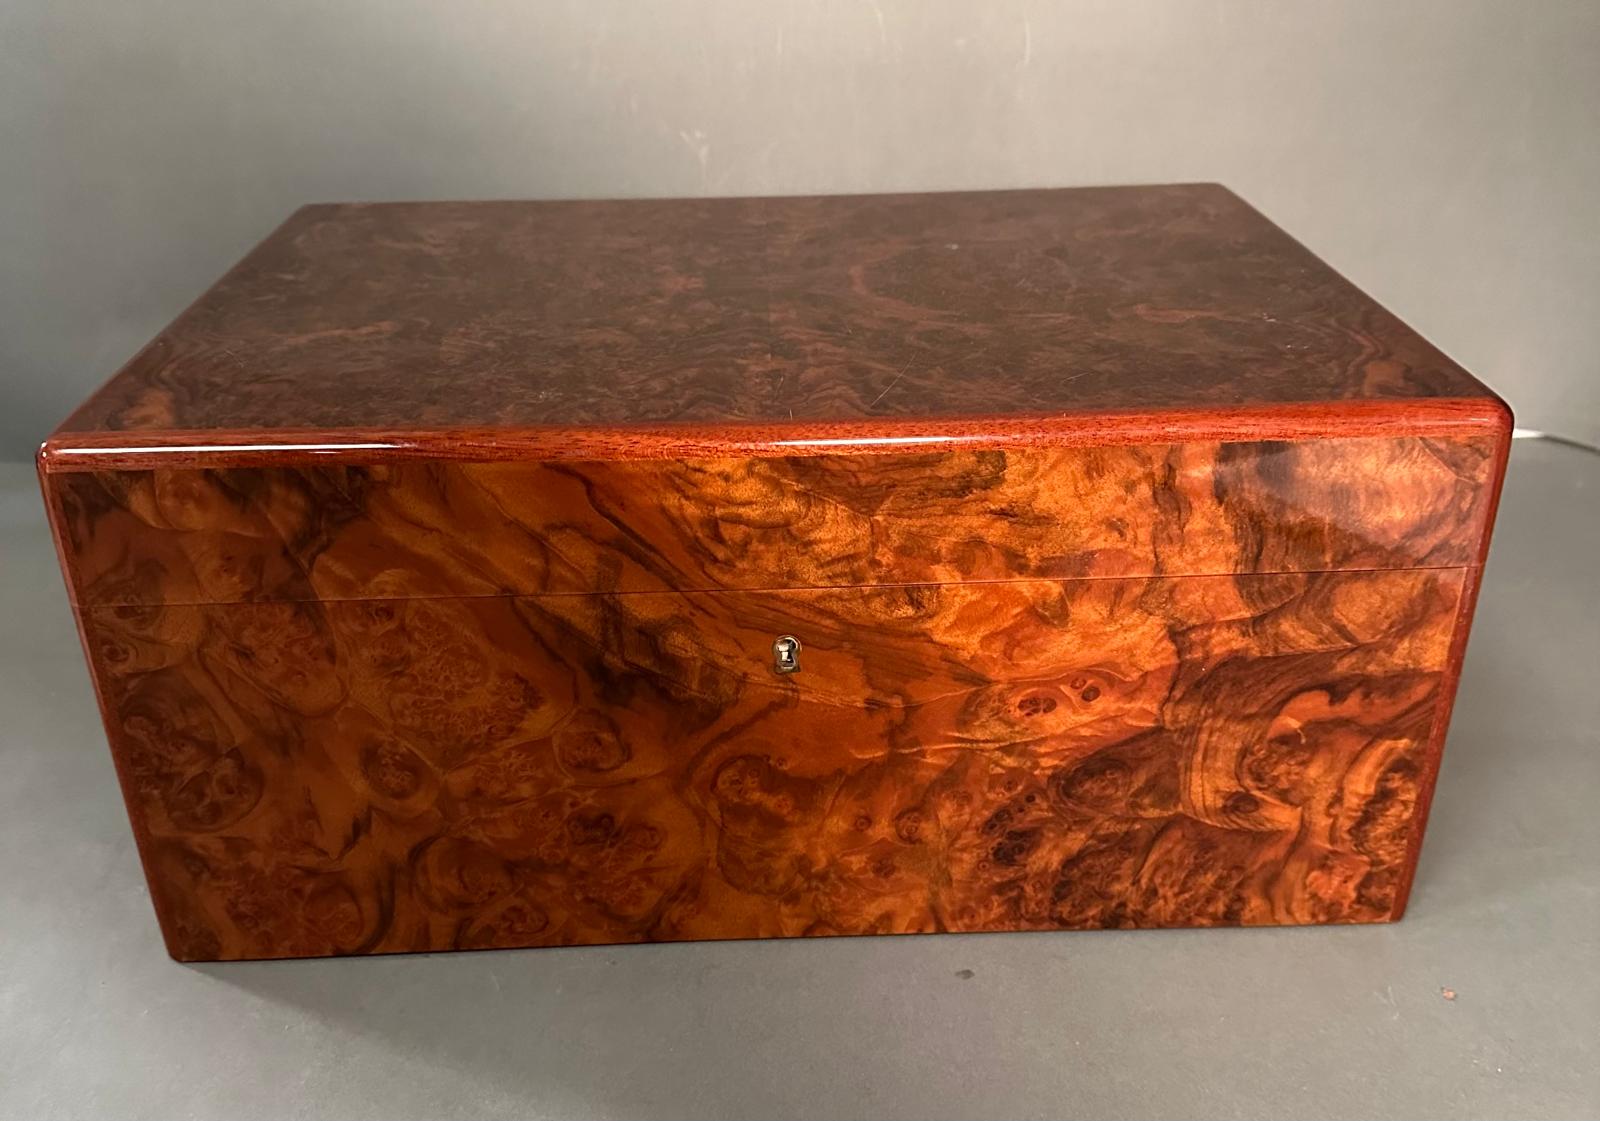 A burr walnut Passatore humidor with cedar veneer and a box of two cigars